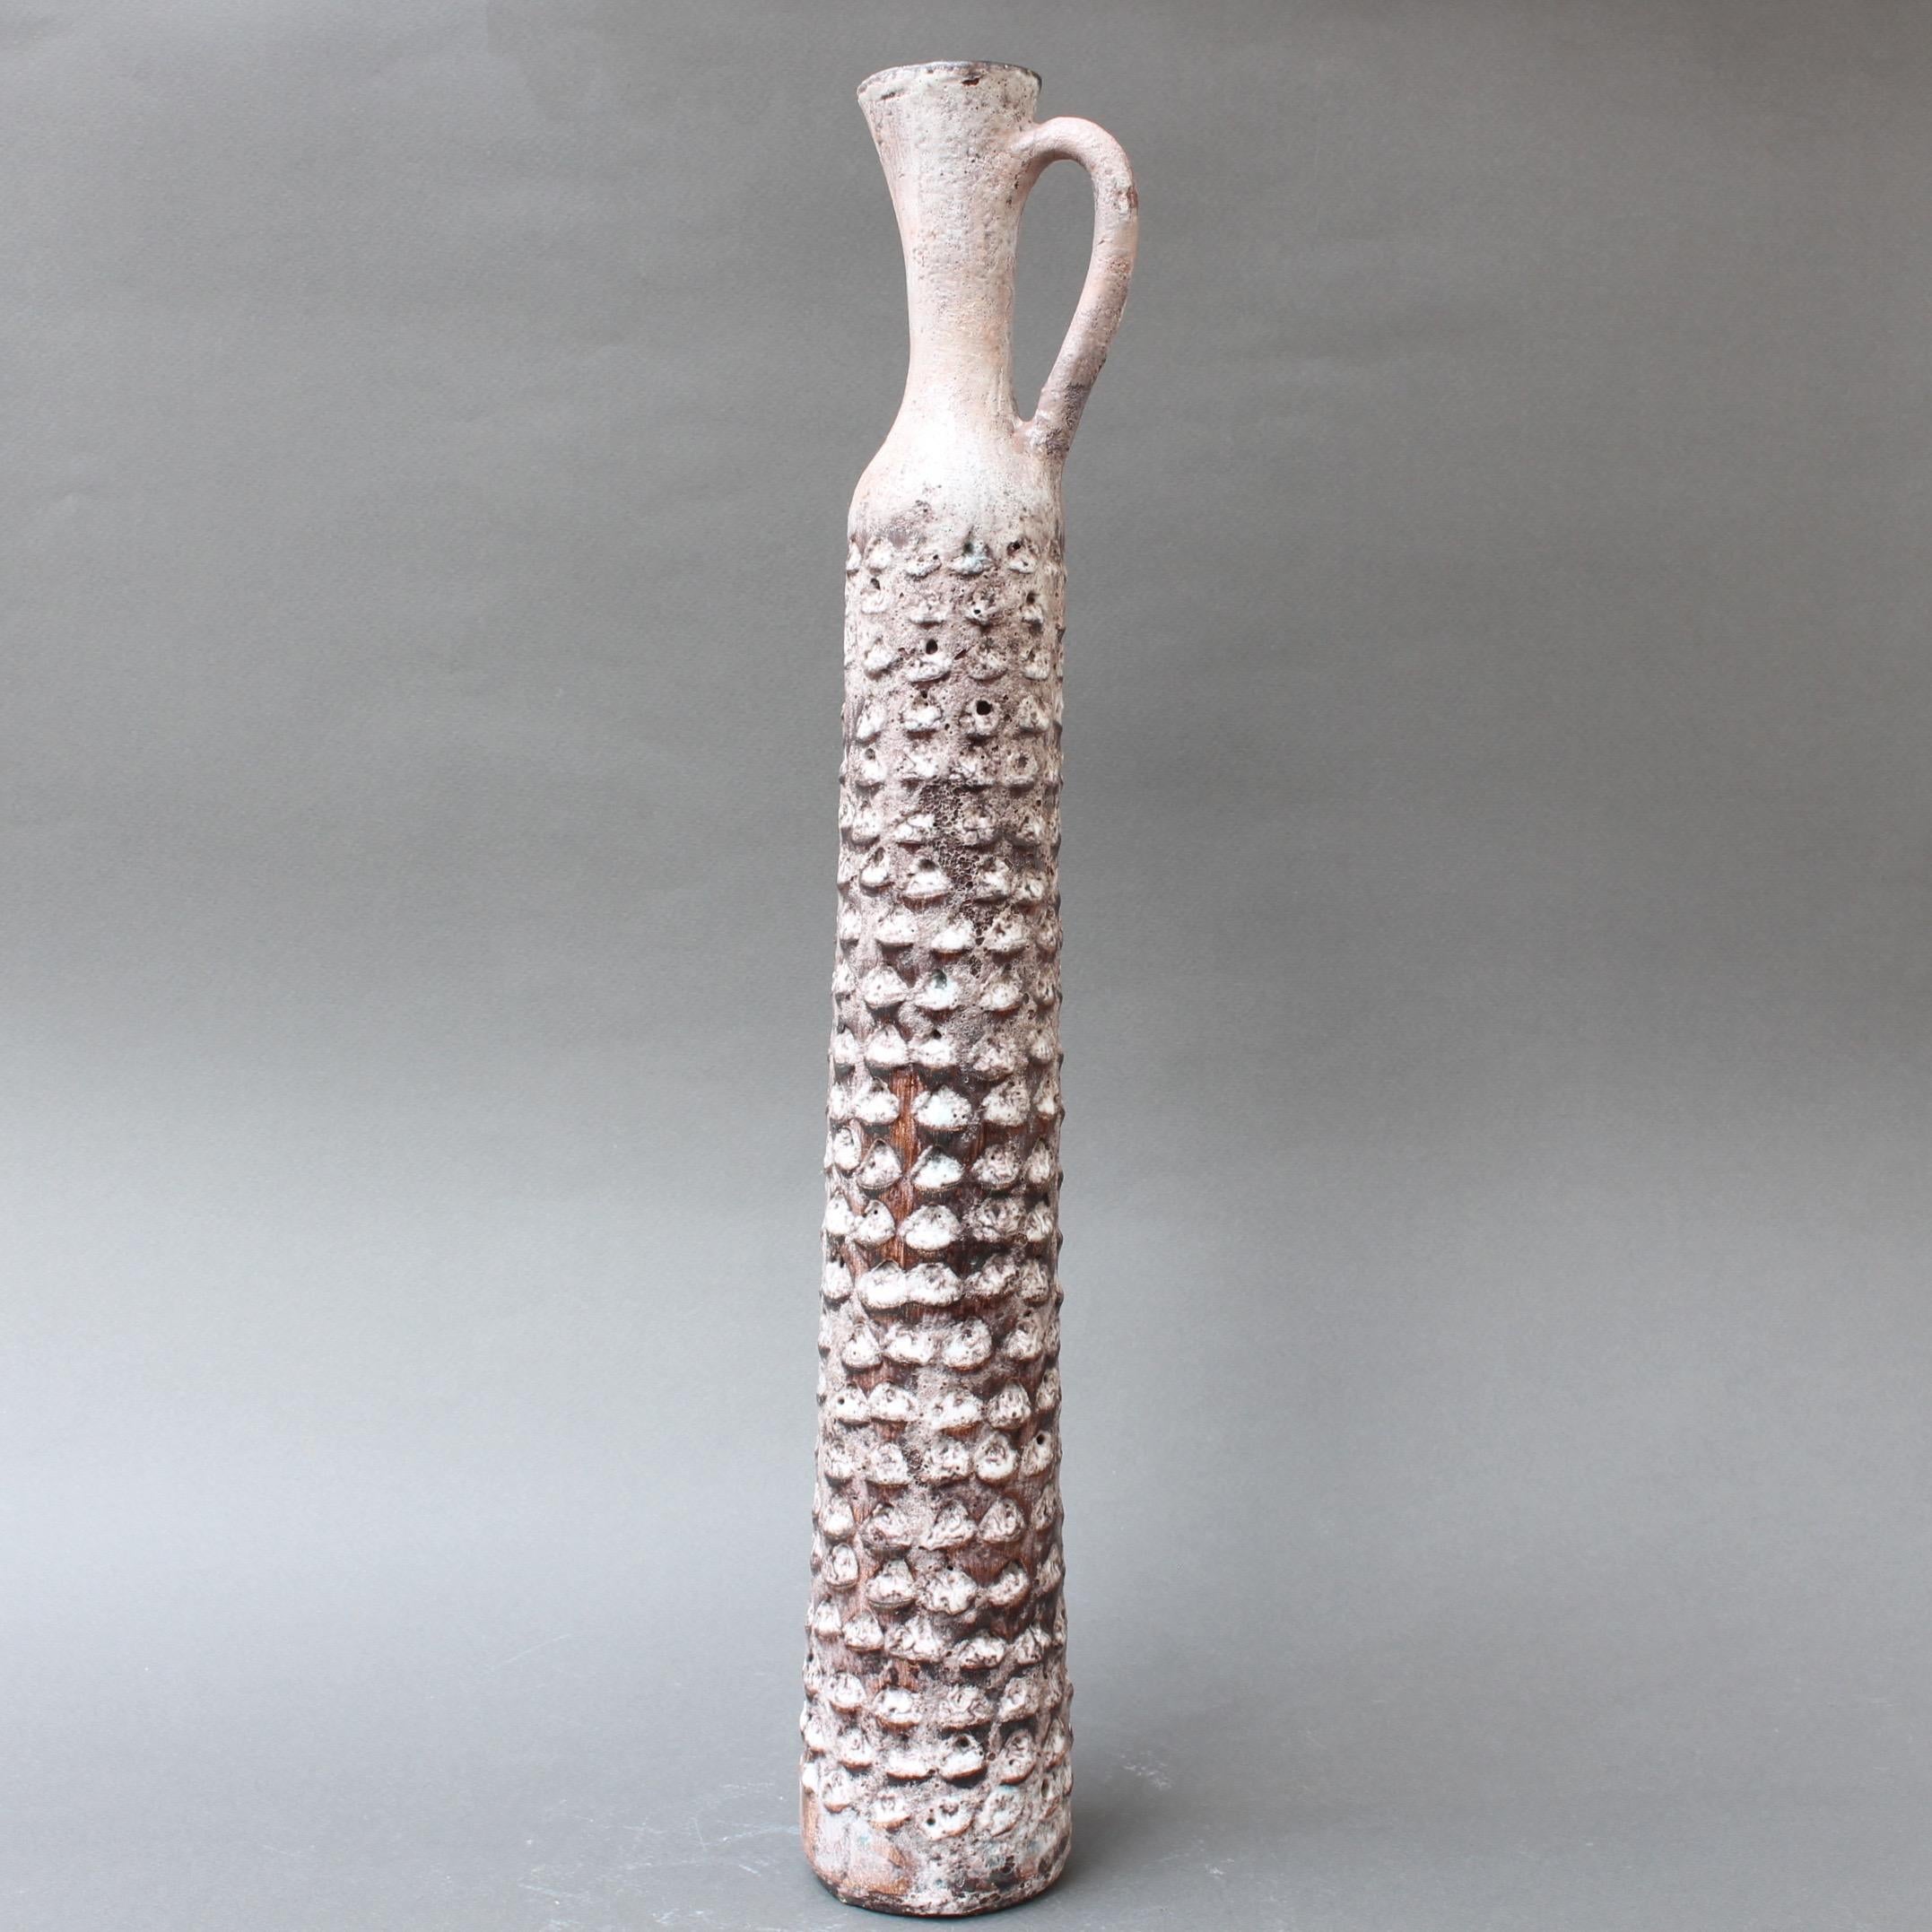 Mid-Century Modern Decorative Elongated Ceramic Flower Vase by Jacques Pouchain, circa 1950s For Sale